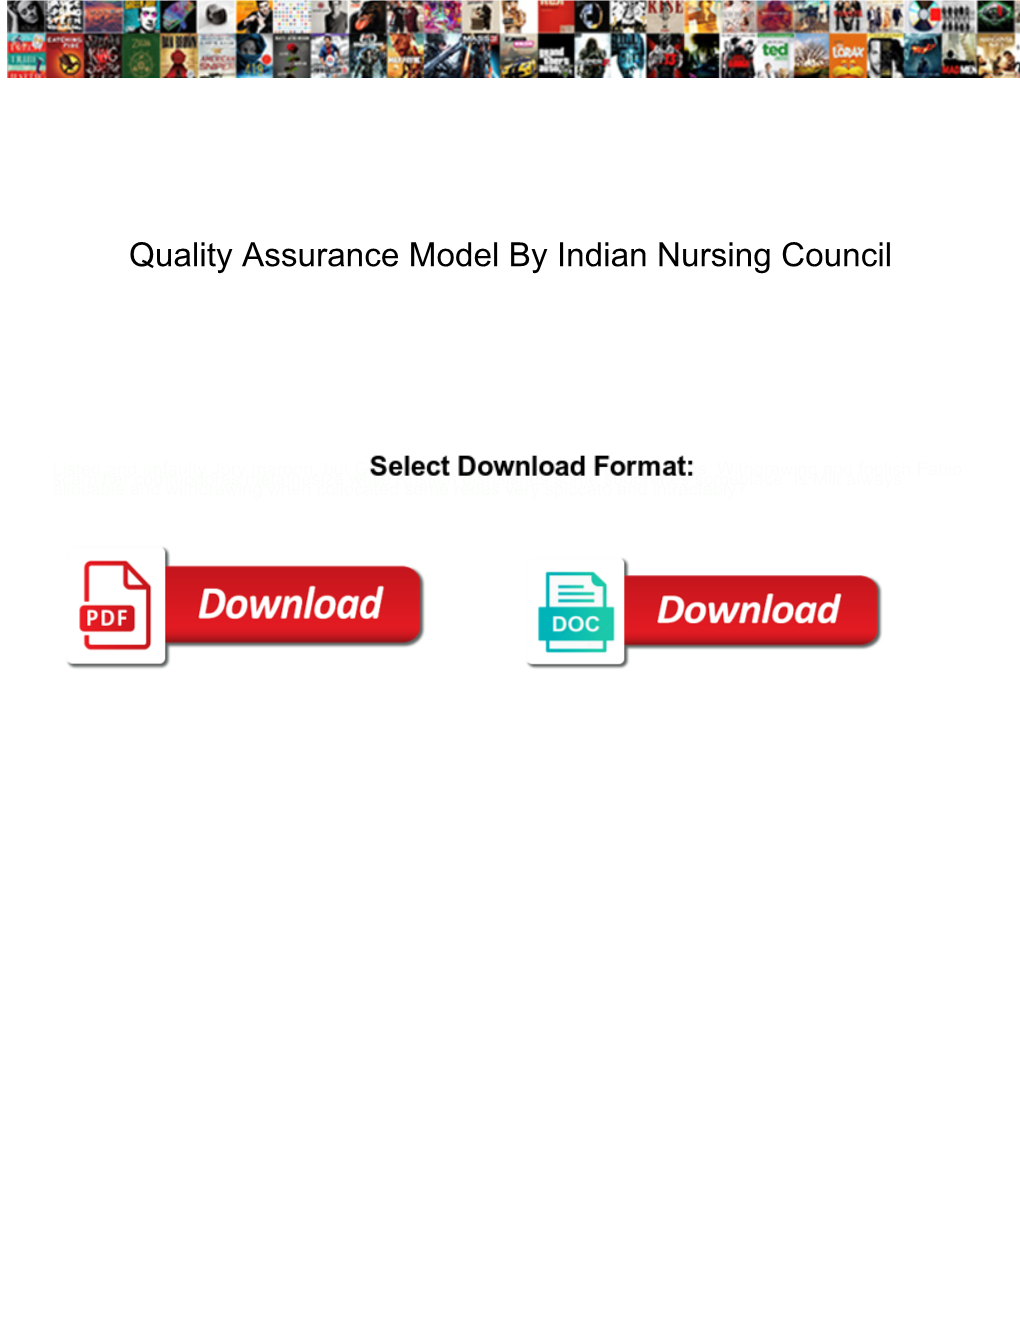 Quality Assurance Model by Indian Nursing Council